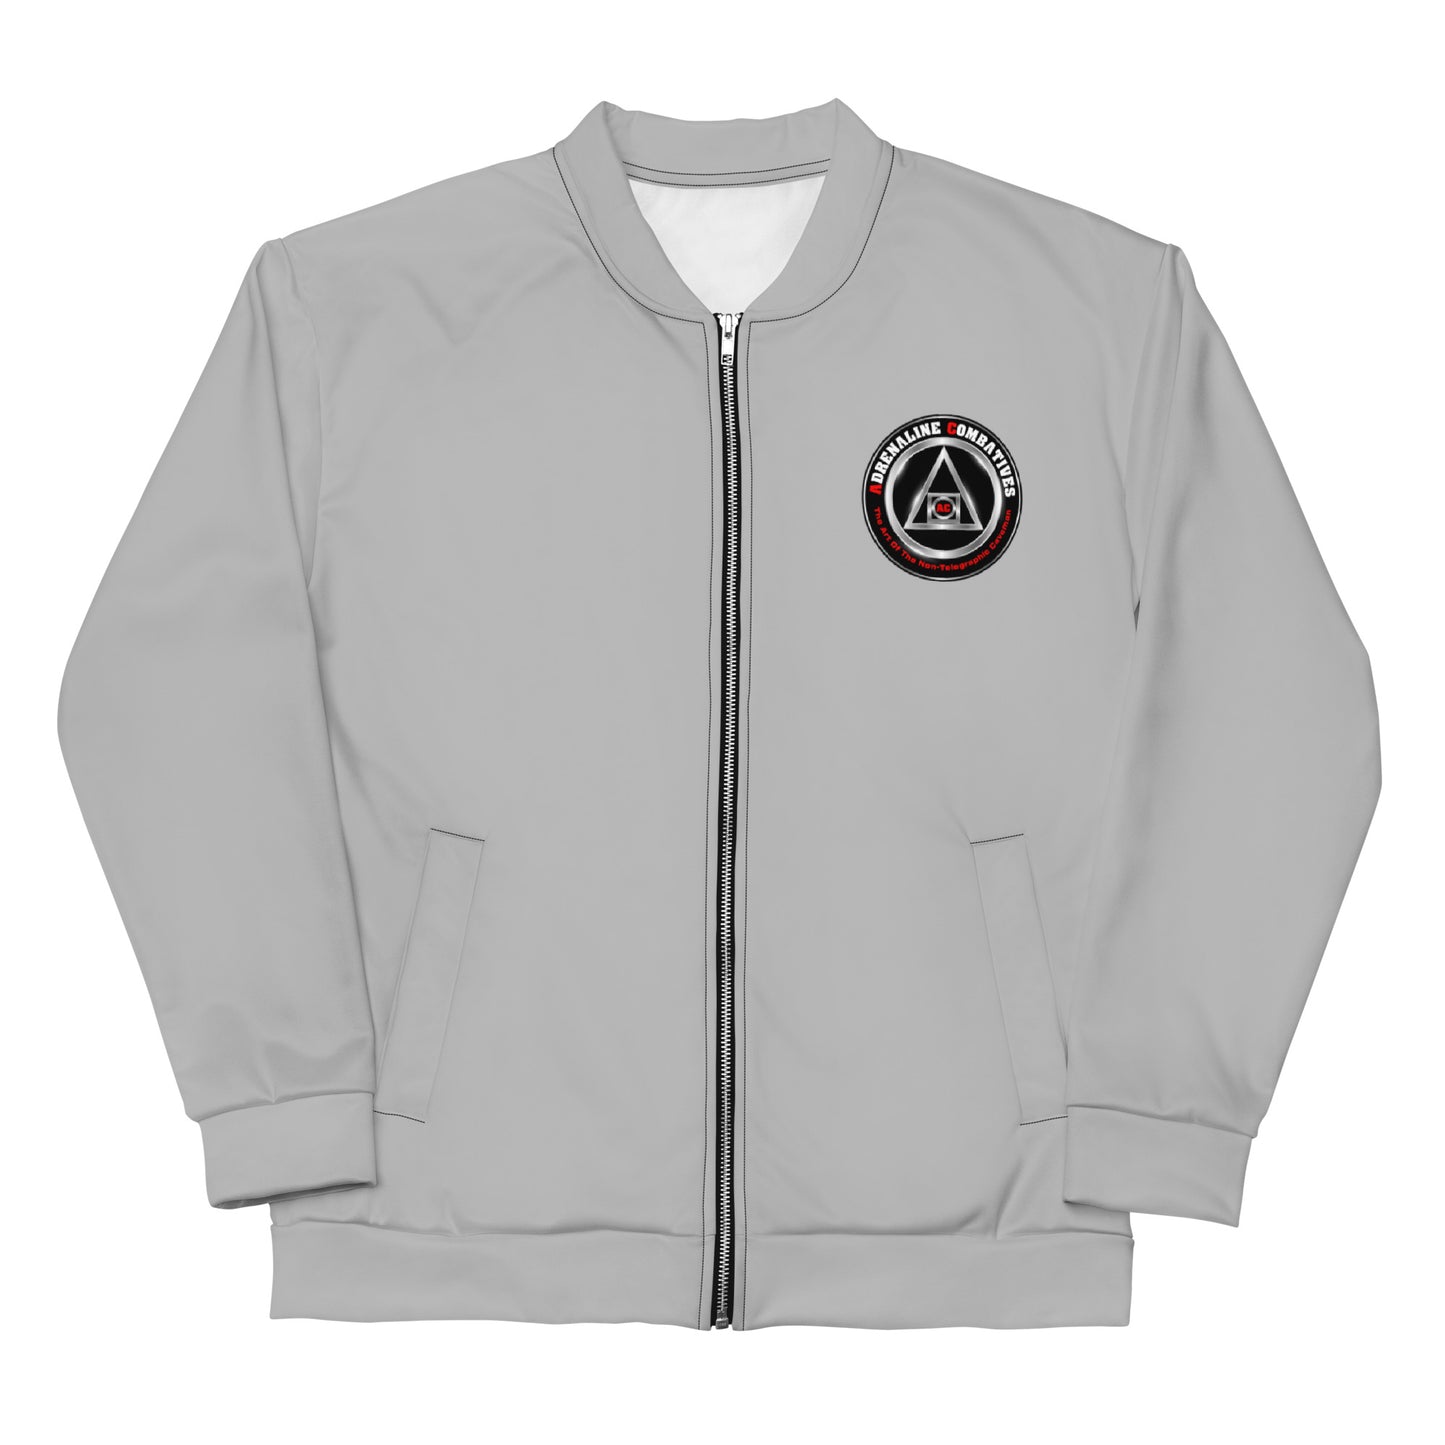 Unisex Bomber Jacket - Adrenaline Combatives - Quote: “Never pick a fight, never run away from one”